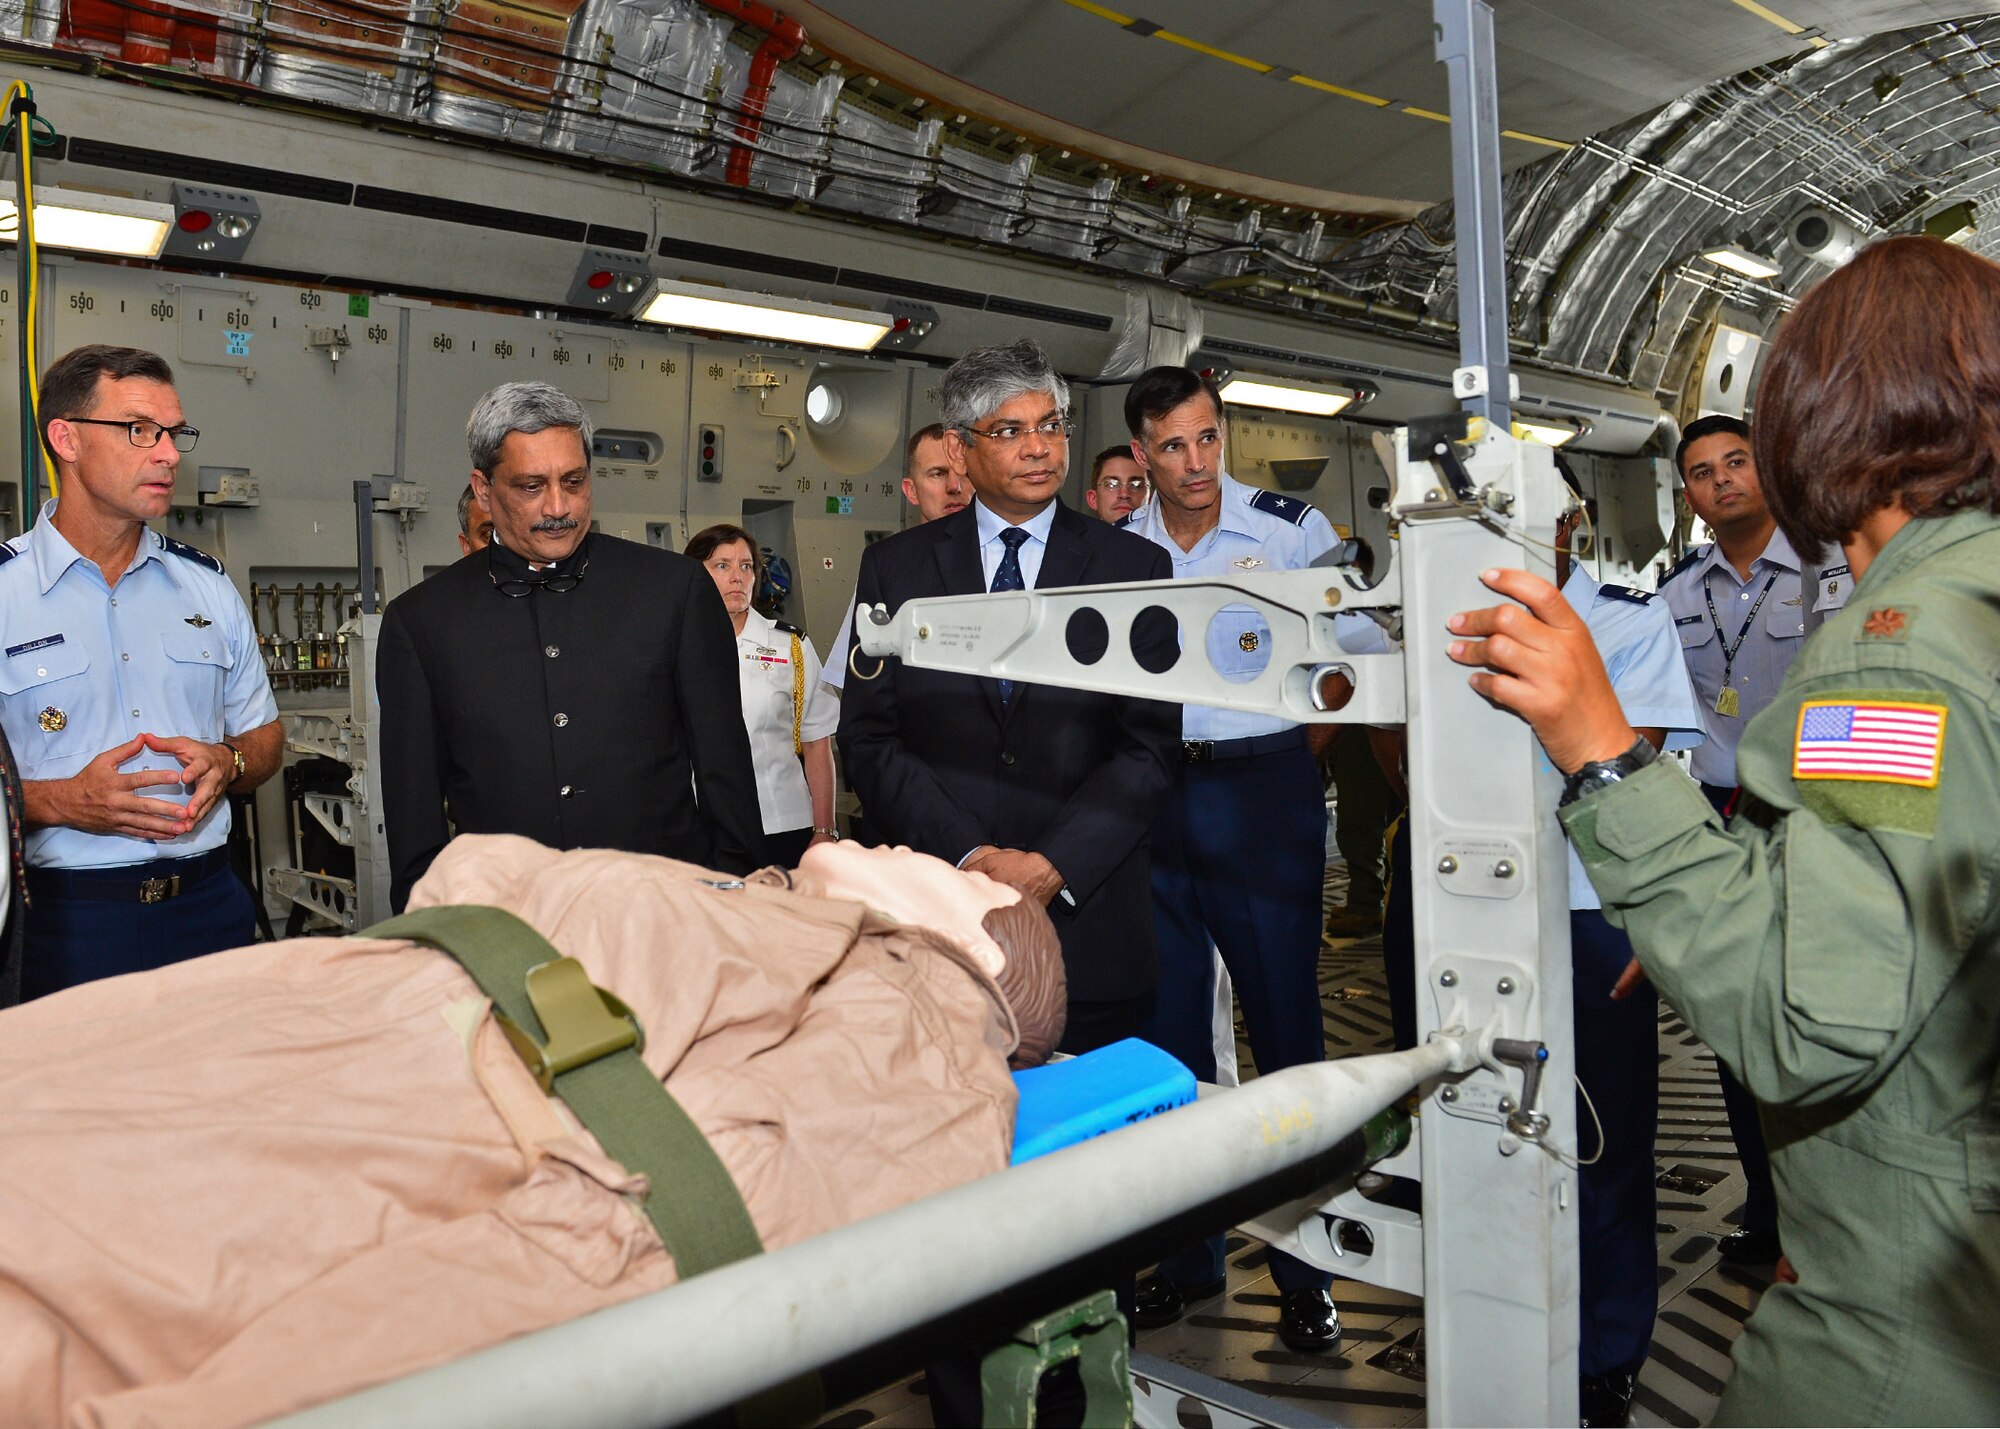 Pacific Air Forces Airmen demonstrate the aeromedical evacuation capabilities of the C-17 Globemaster III to Indian Defense Minister Manohar Parrikar, left, and Arun K. Singh, the Indian ambassador to the U.S., on Joint Base Pearl Harbor-Hickam, Hawaii, Dec. 7, 2015. The Indian air force has the world's second largest fleet of C-17s, behind the U.S., and these aircraft have already proven their value in supporting international response to regional crises. (U.S. Air Force photo/Tech. Sgt. Aaron Oelrich)